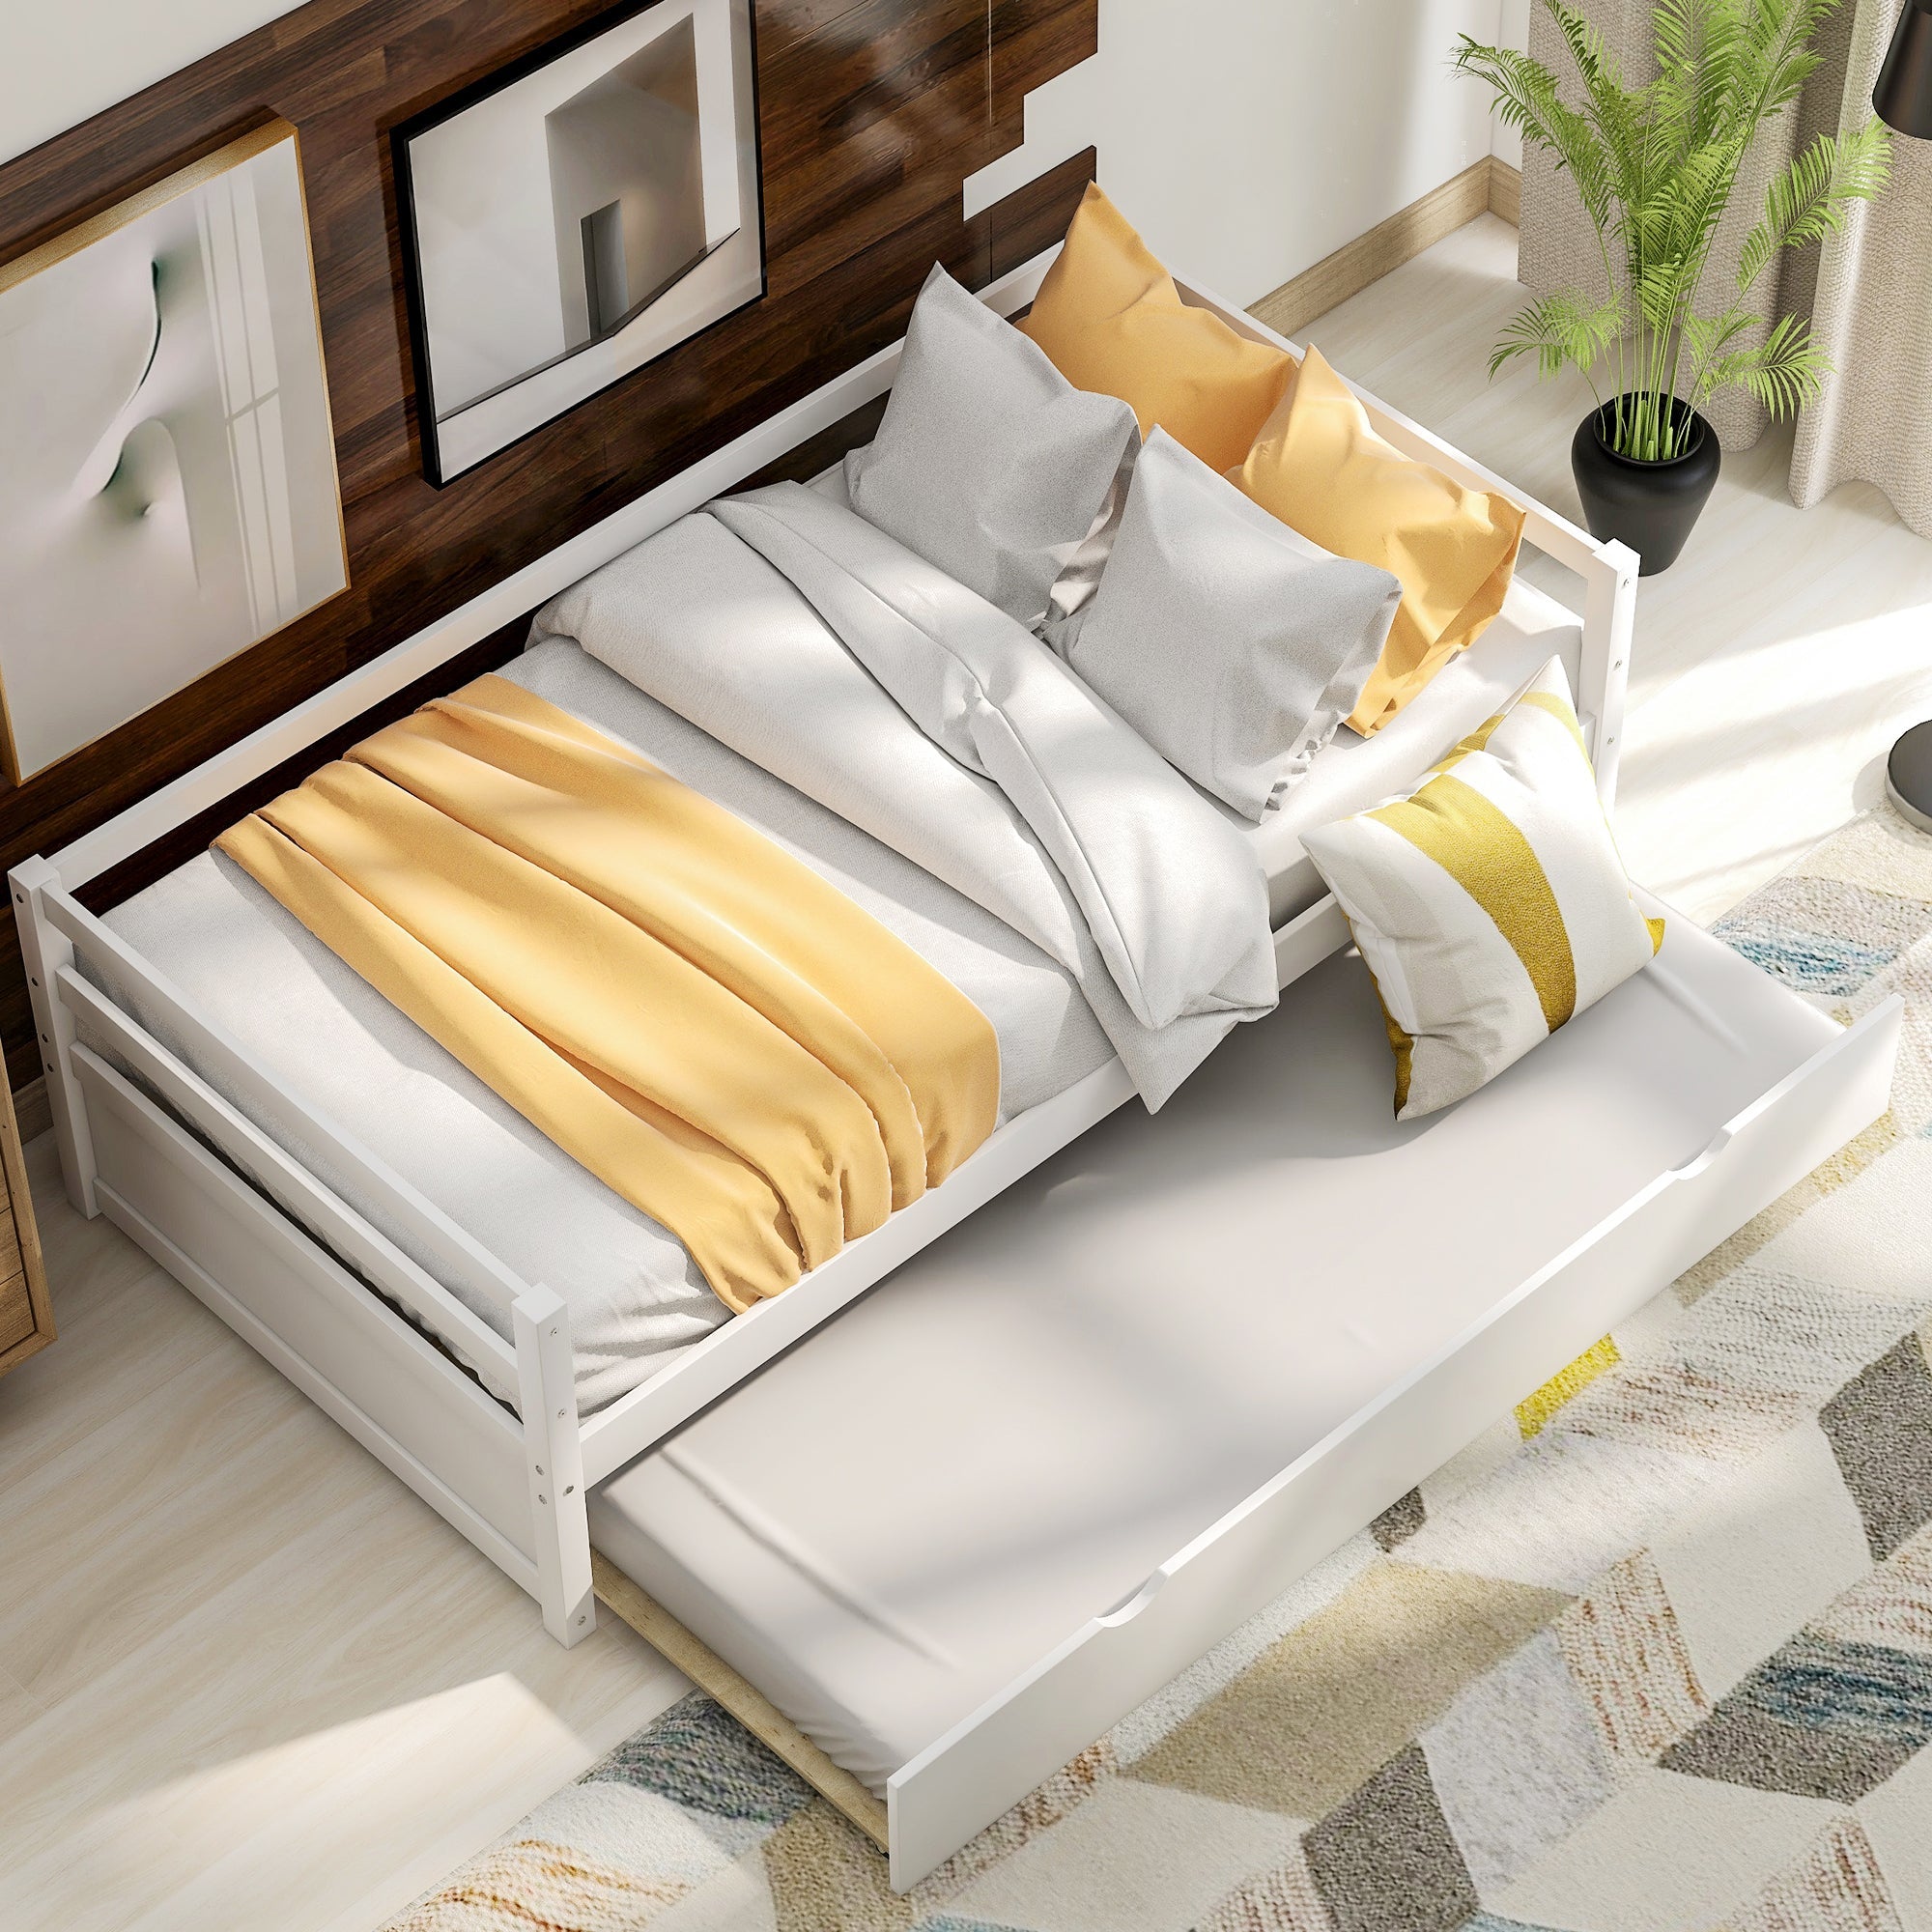 Daybed with Trundle Frame Set | Twin Size | White | Space-Saving Solution